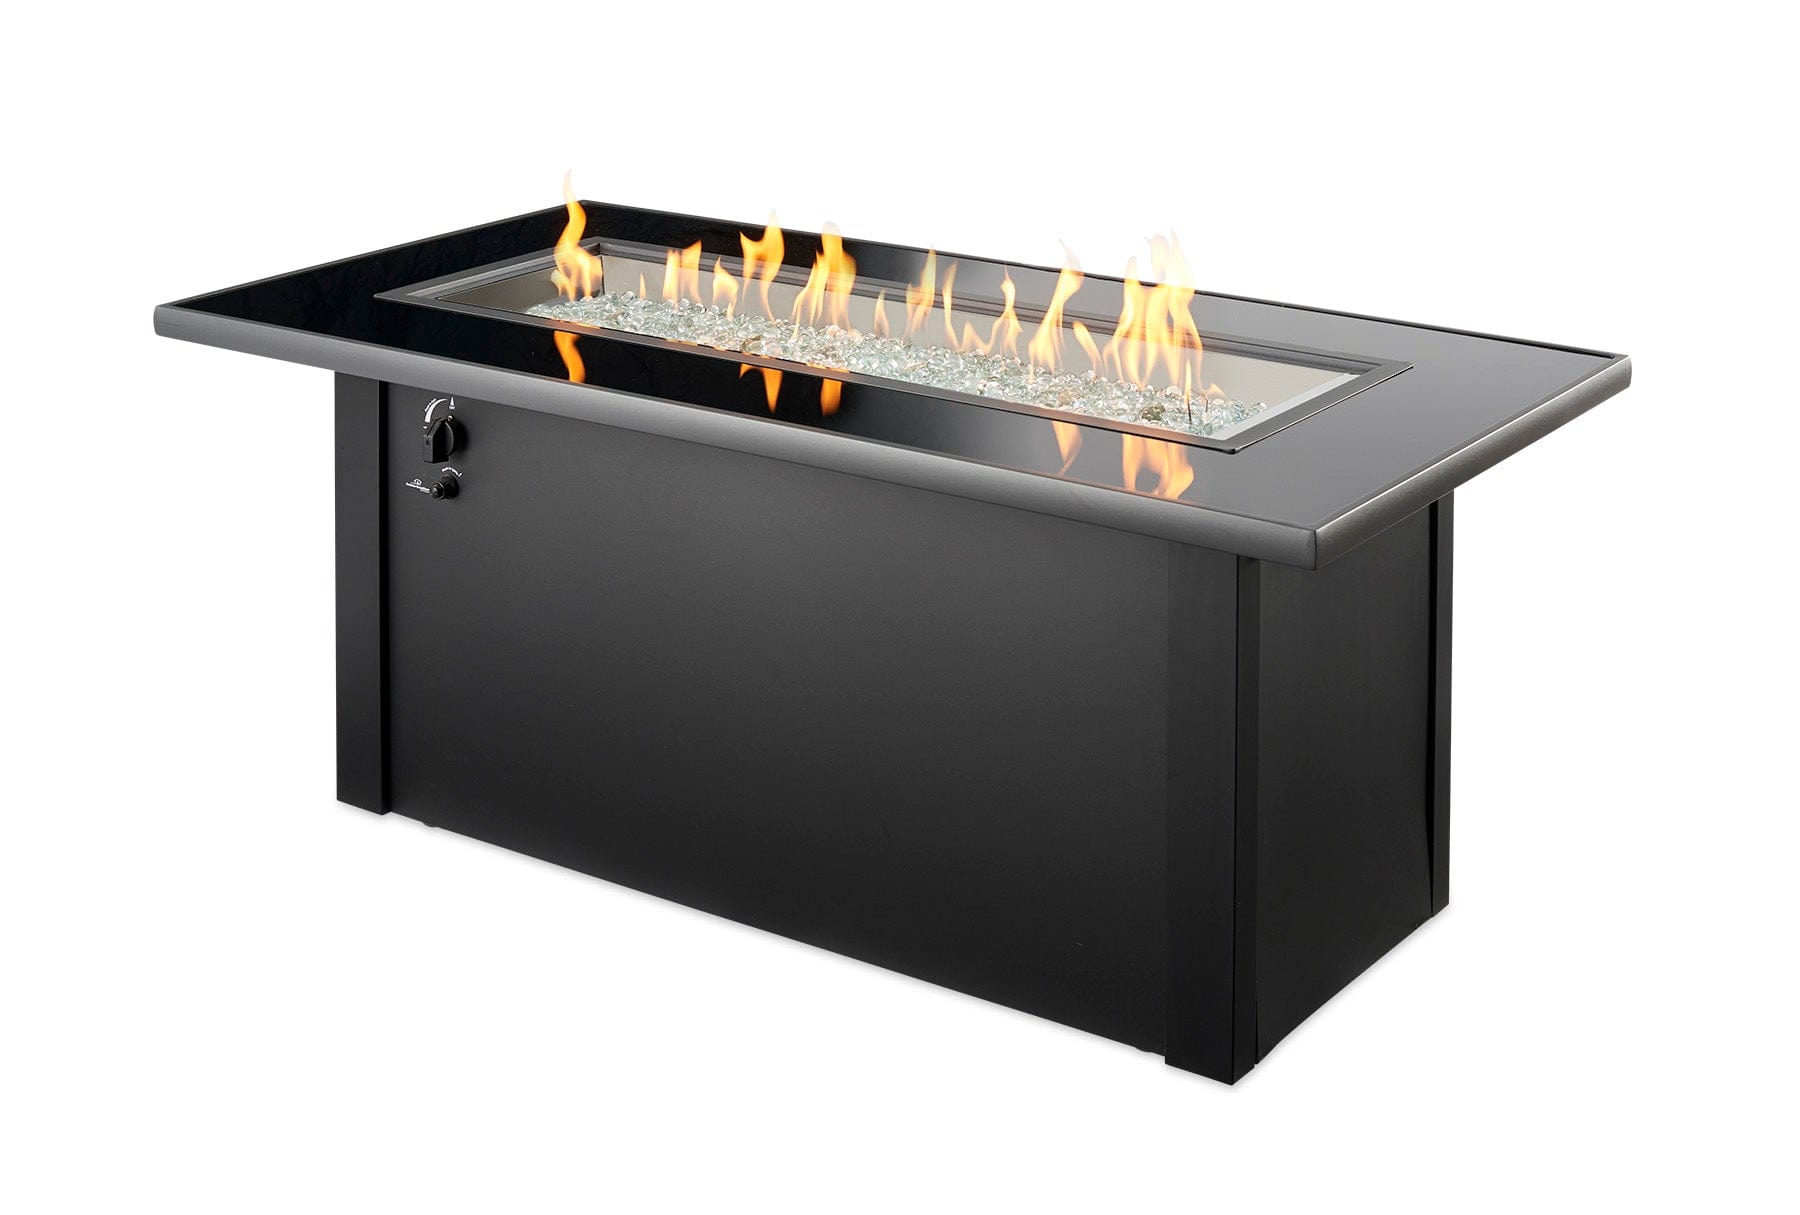 The Outdoor Great Room Fire Features The Outdoor GreatRoom Monte Carlo Linear Gas Fire Pit Table / MCR-1242-BLK-K